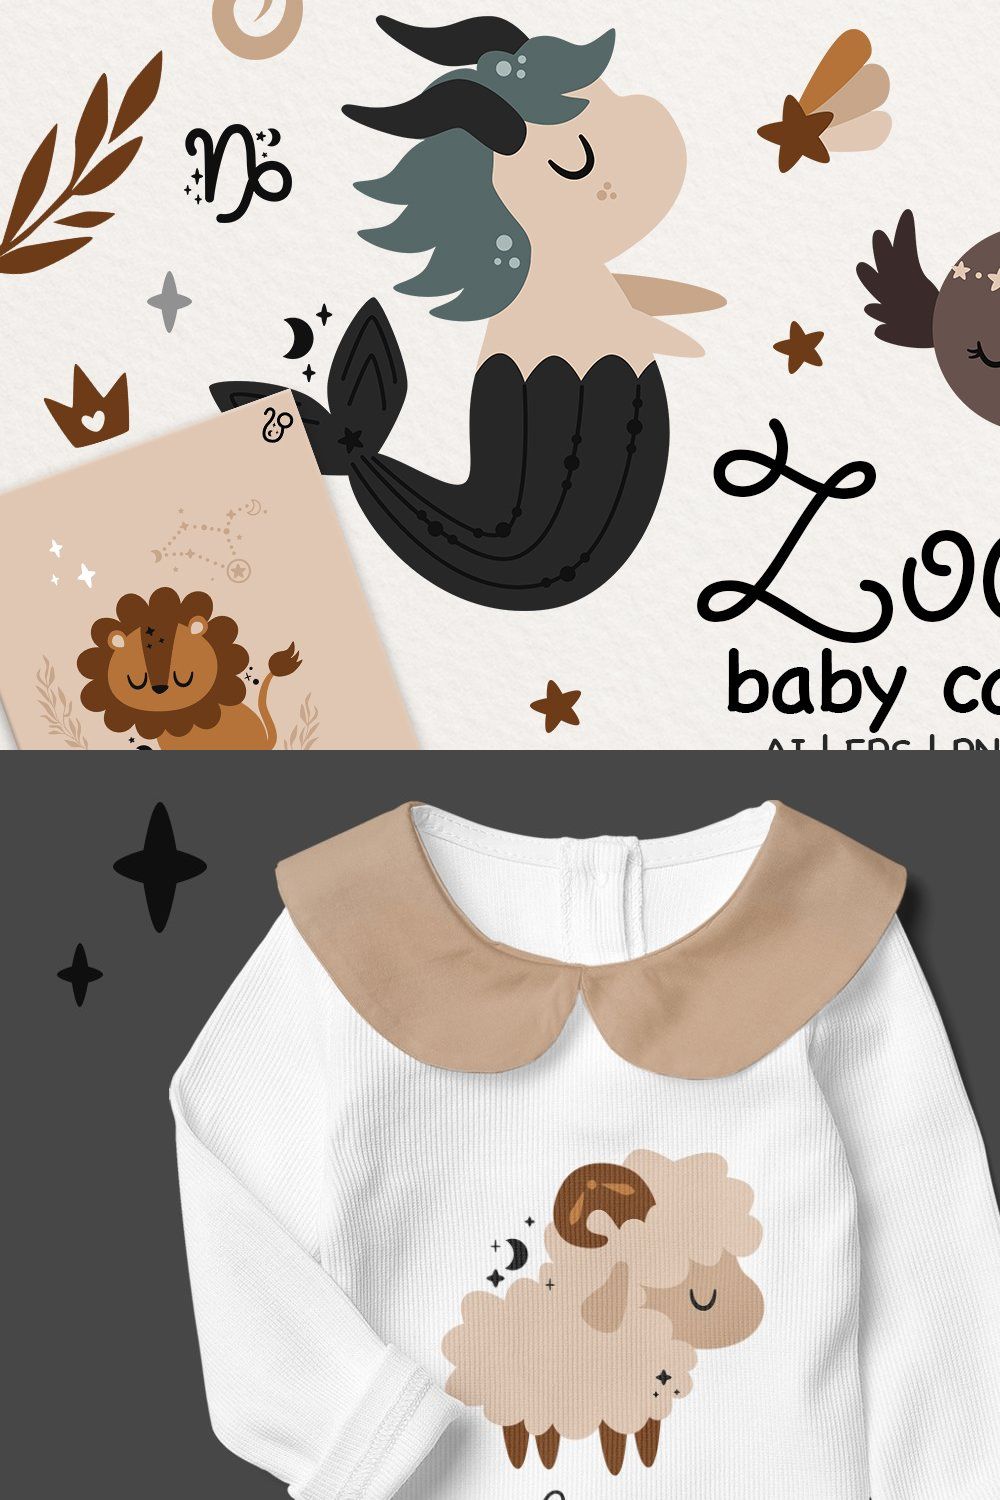 Zodiac baby collection pinterest preview image.